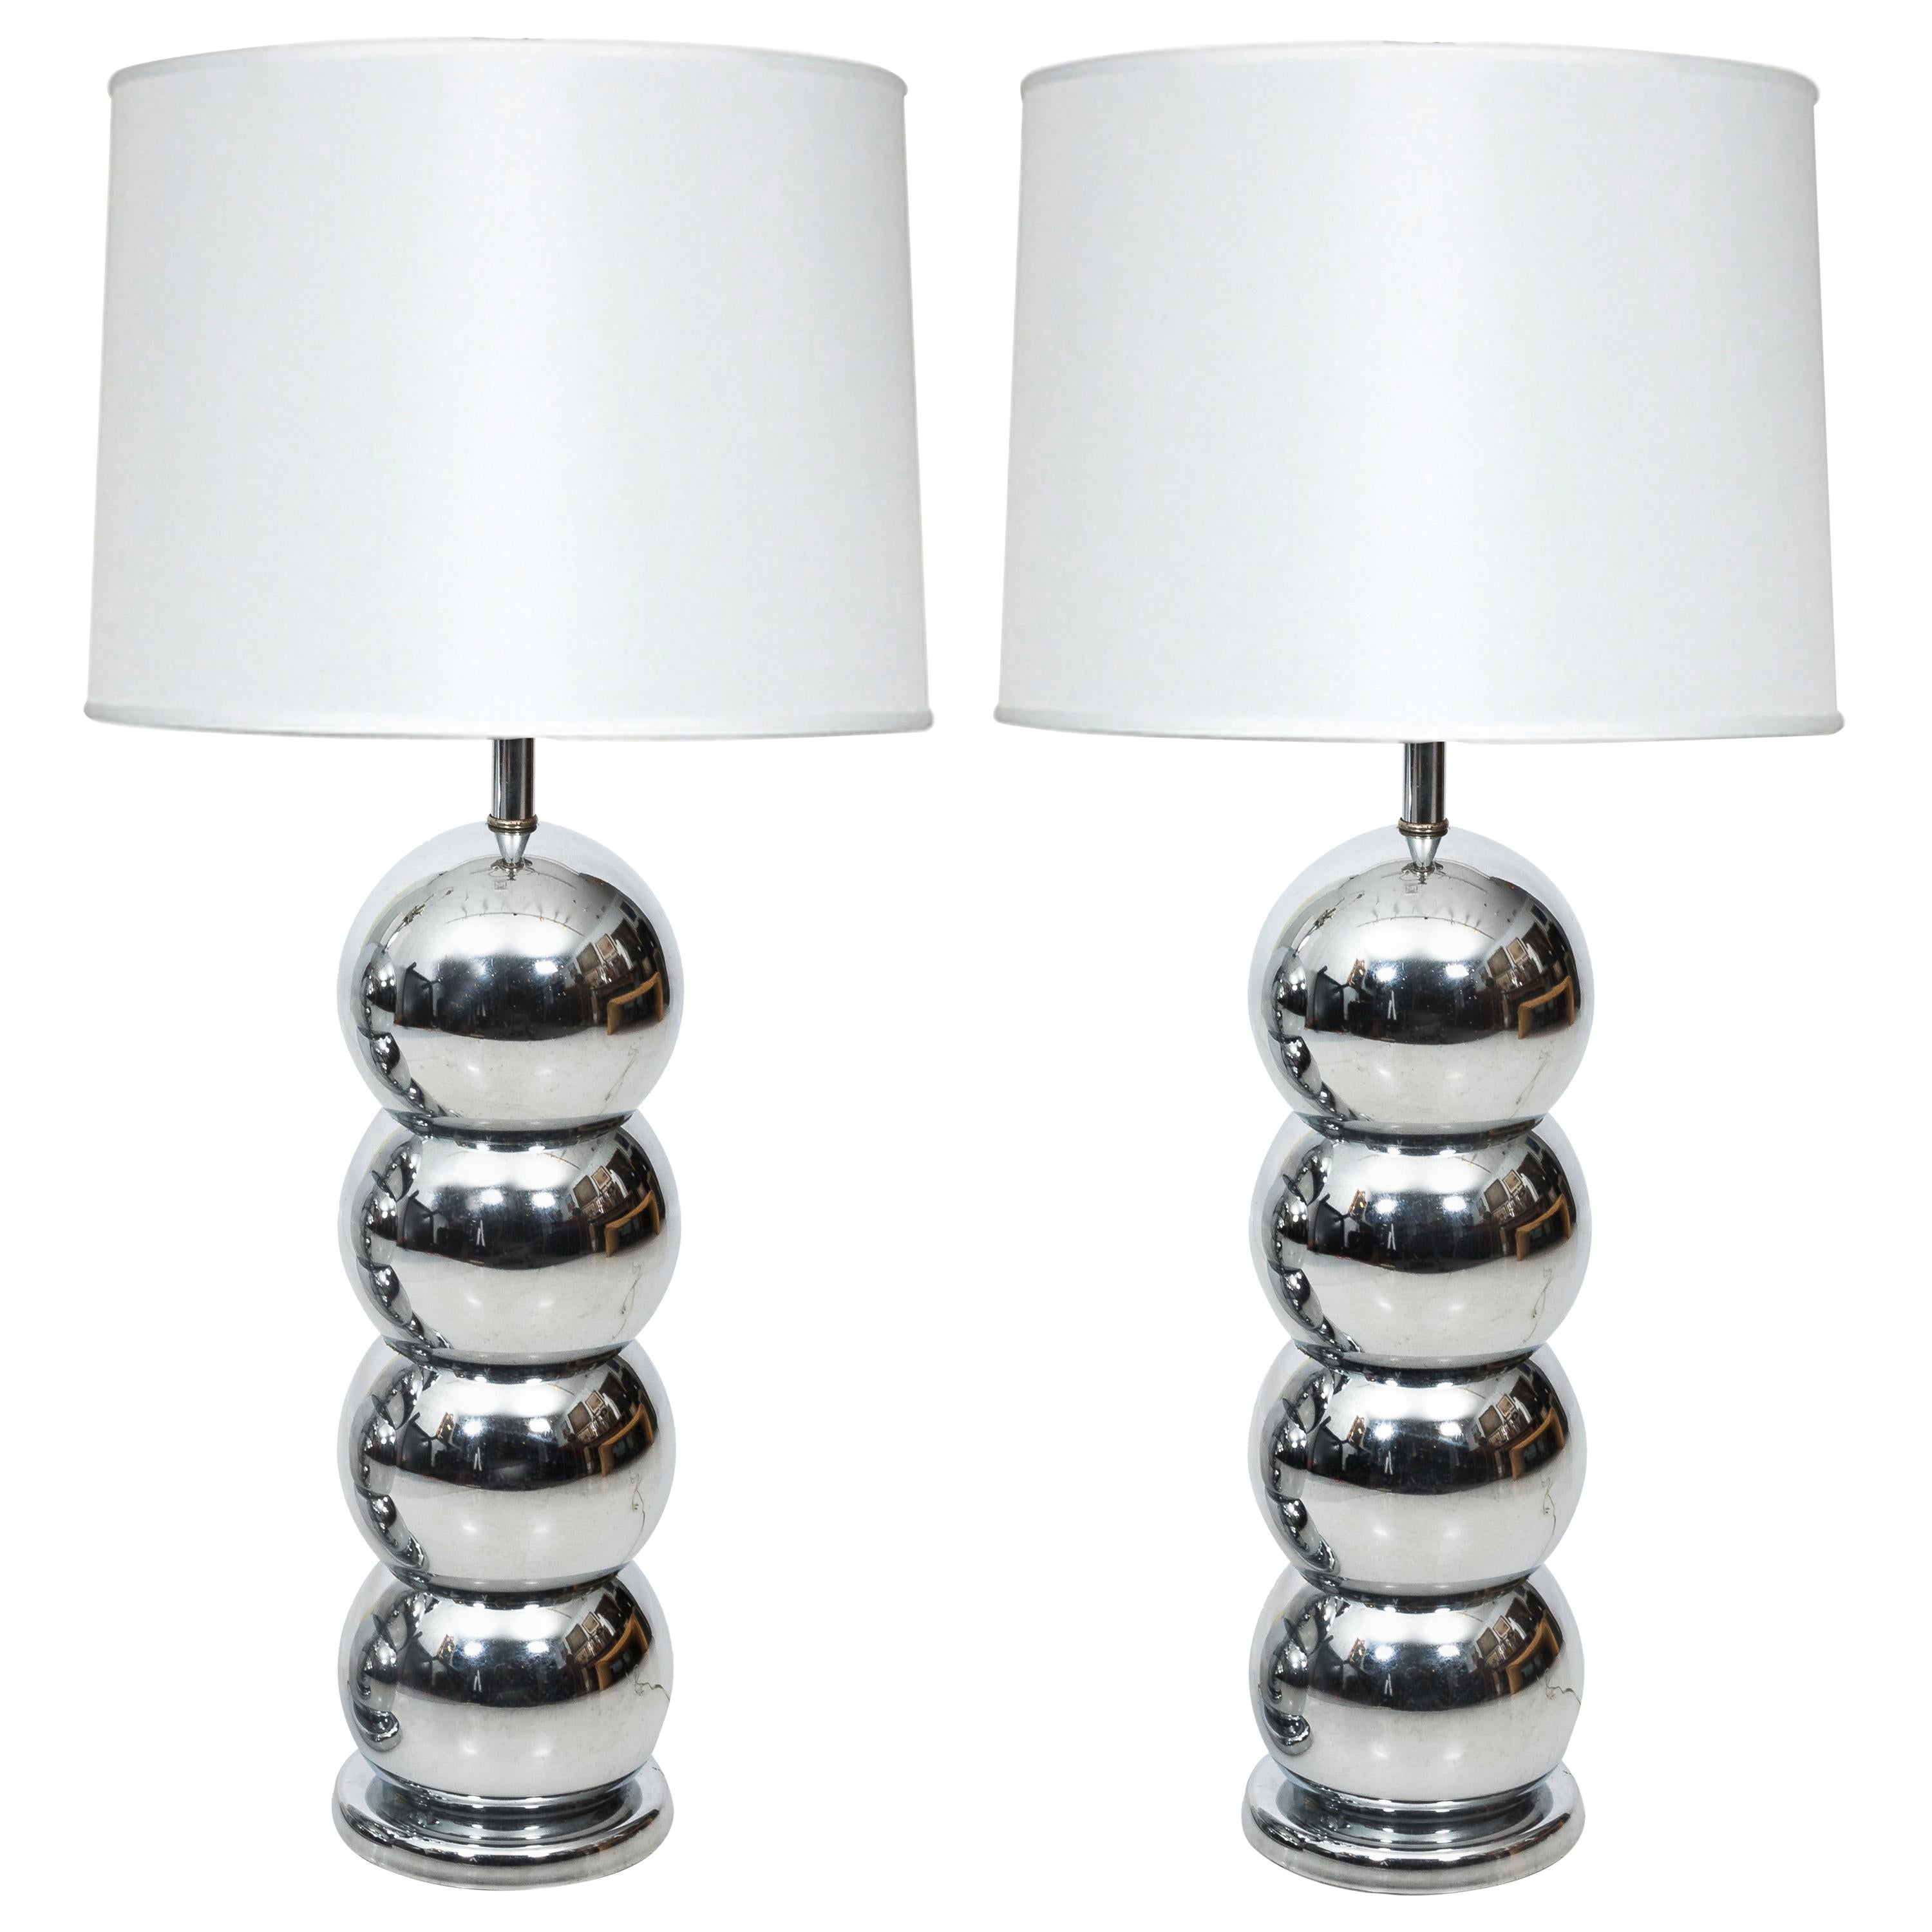 Pair of Chrome Ball Lamps